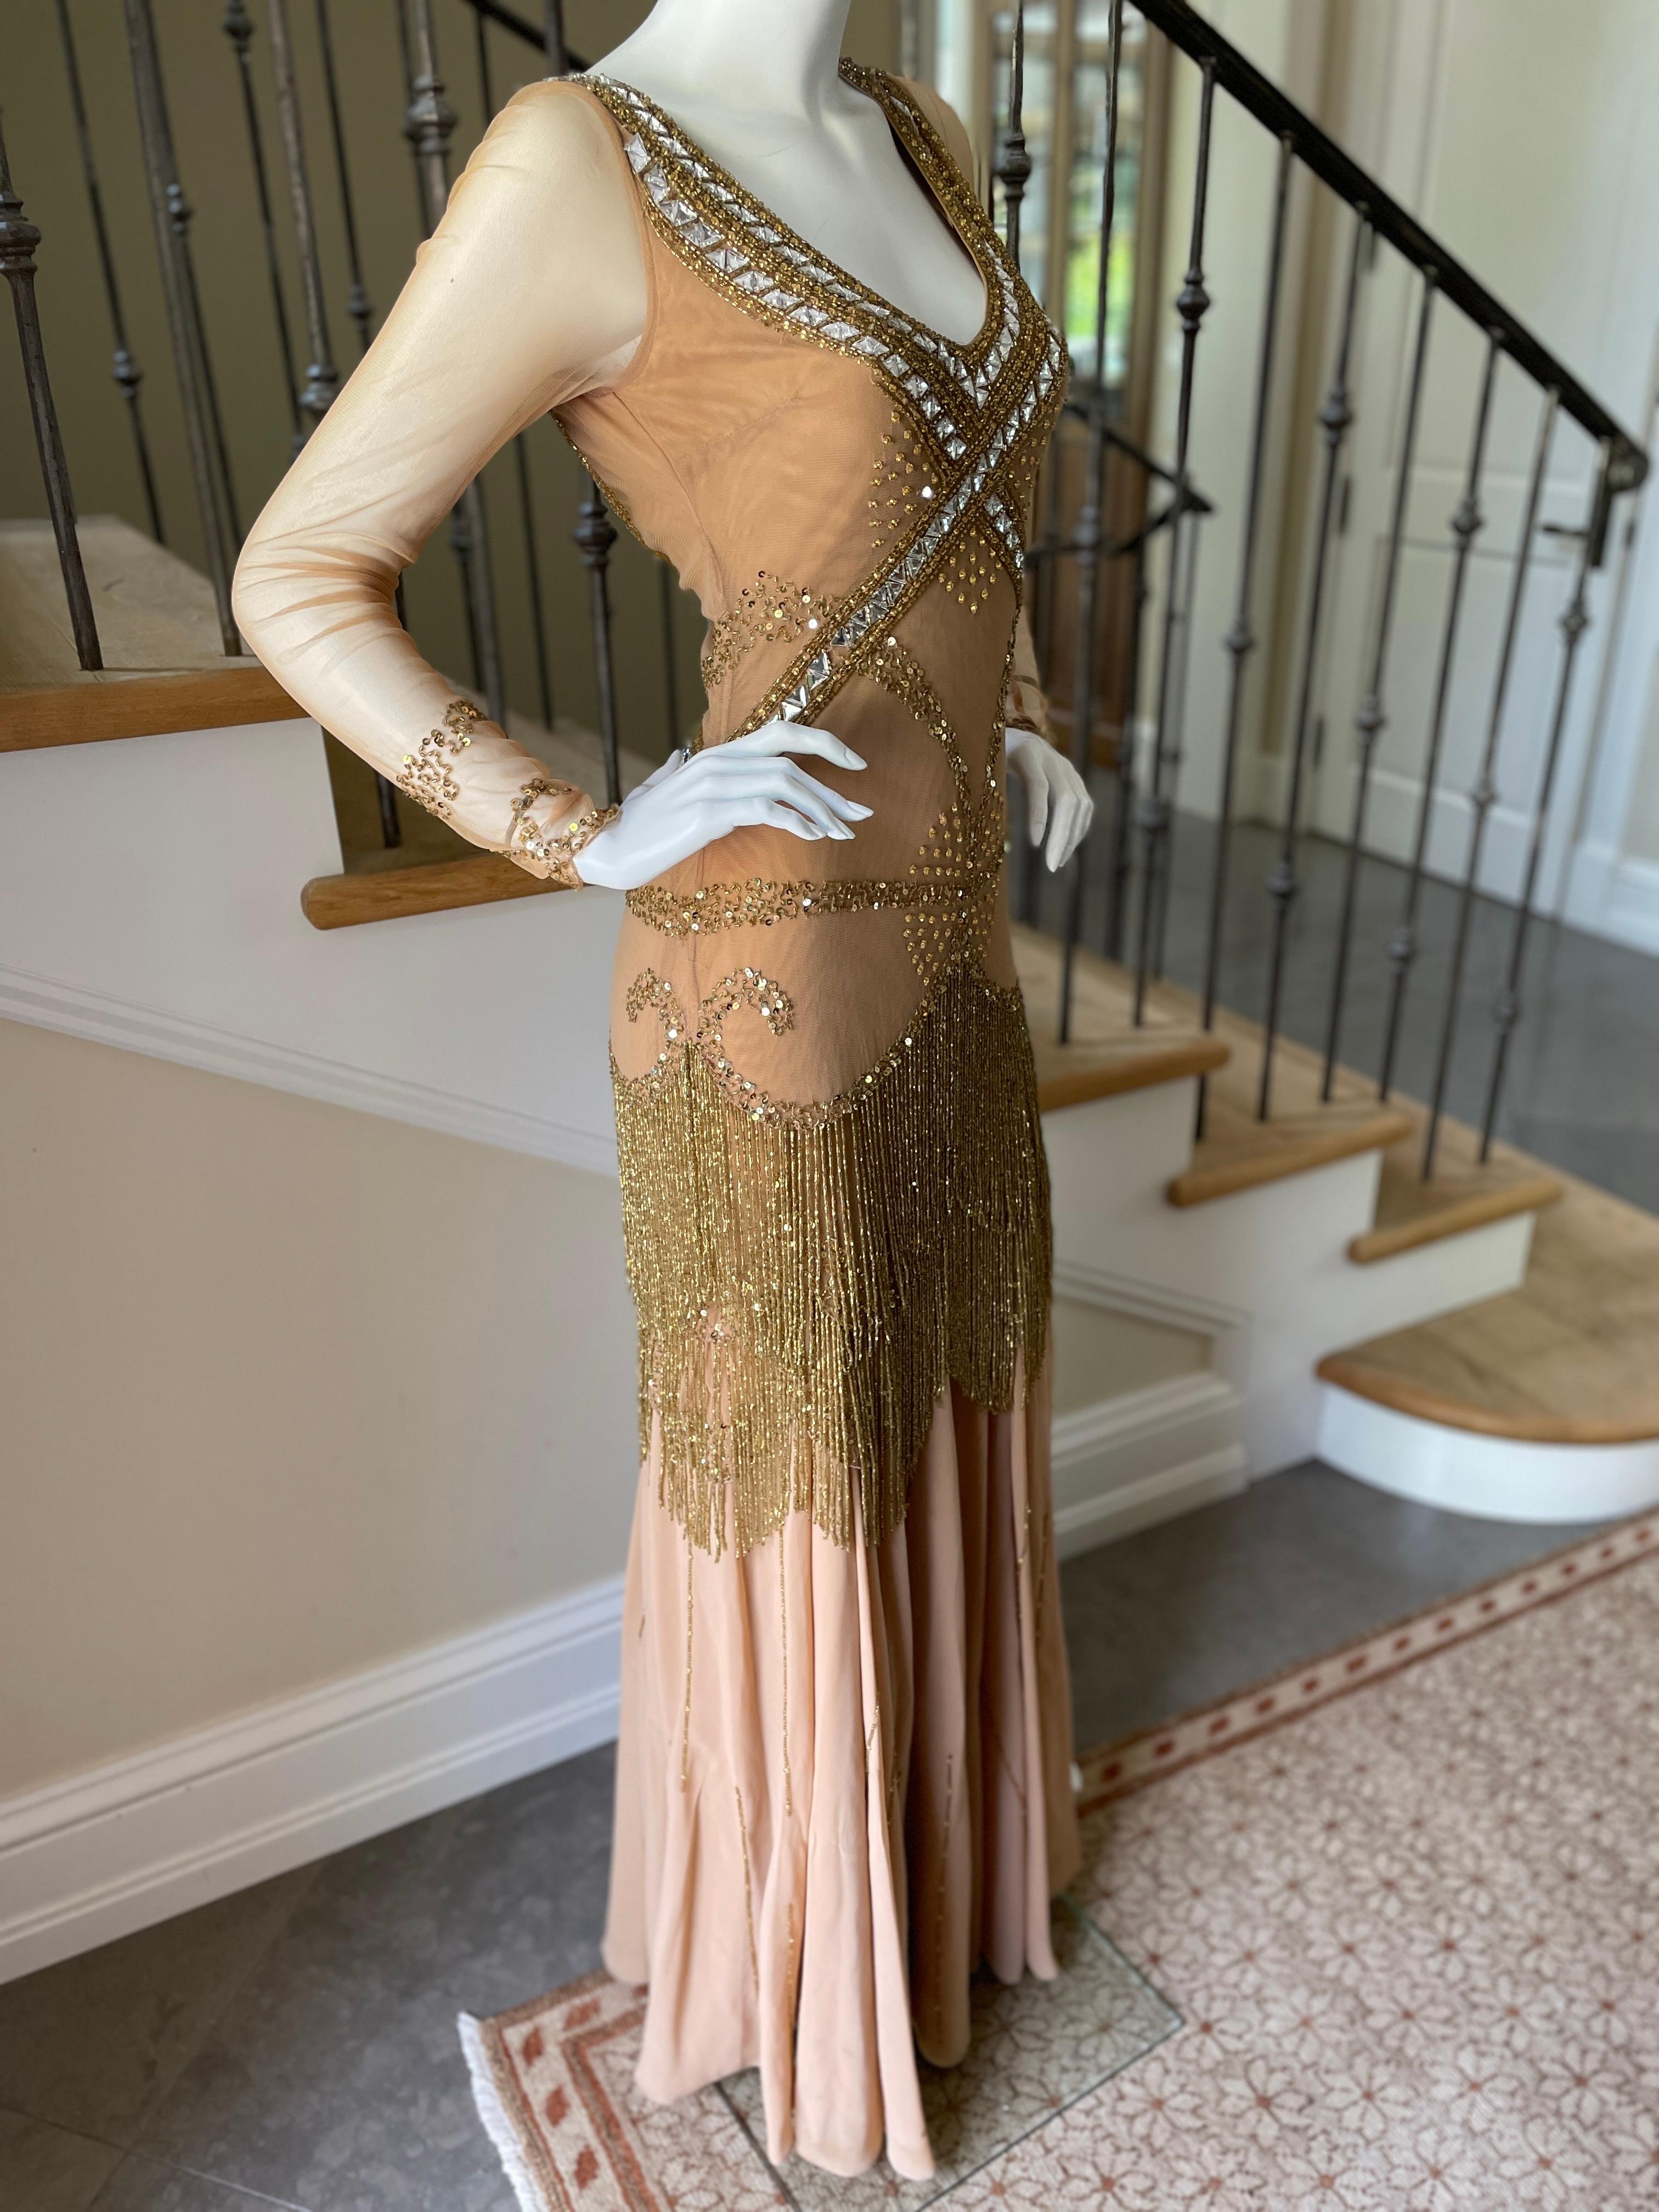 Class Cavalli Extravagantly Jeweled Vintage Evening Dress with Beaded Fringe In Good Condition For Sale In Cloverdale, CA